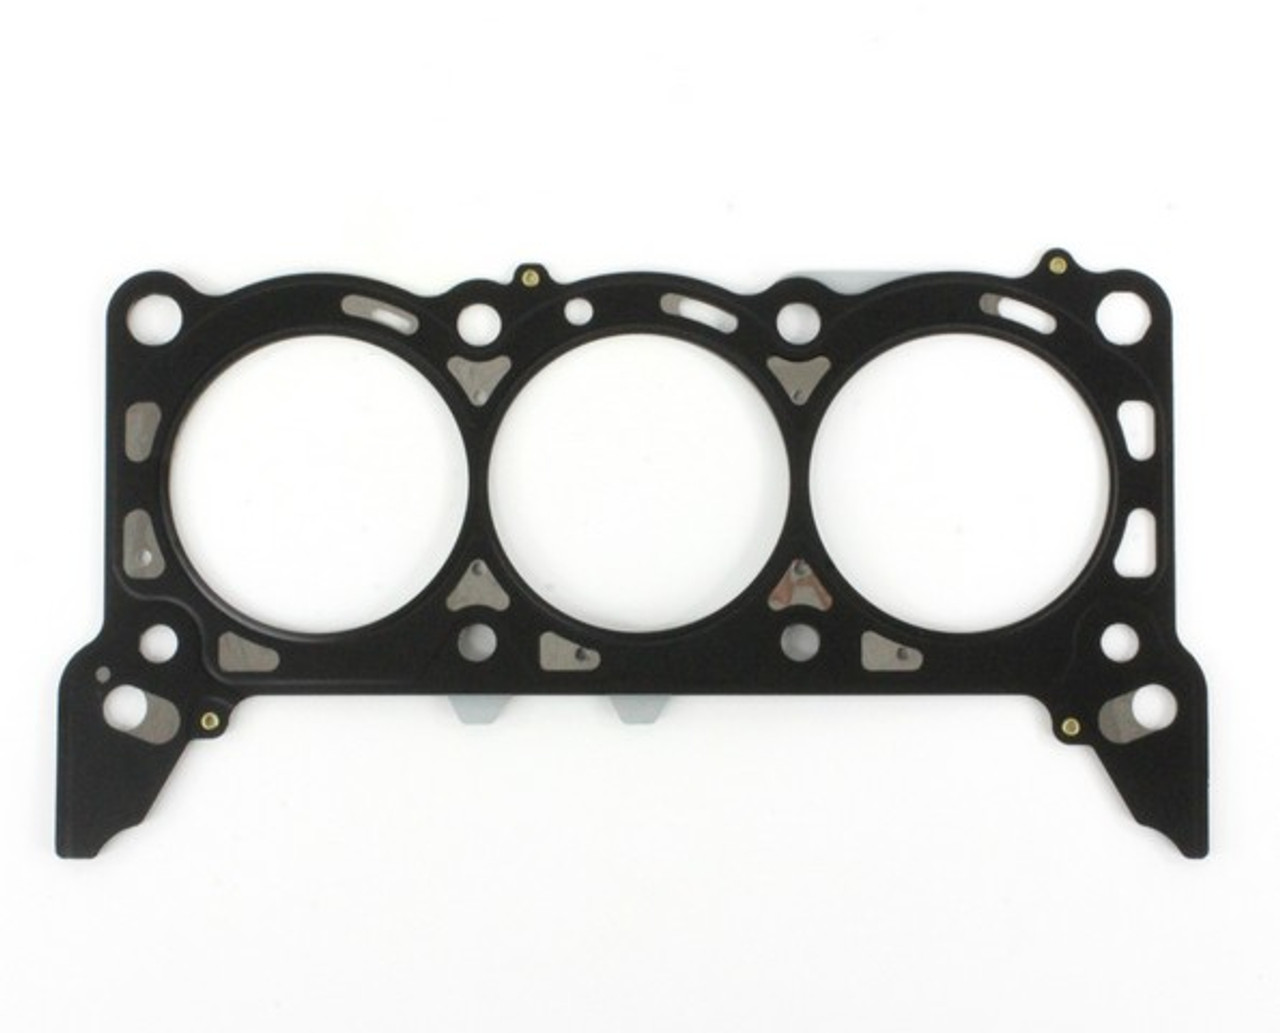 Head Gasket 3.8L 1999 Ford Mustang - HG4123L.43